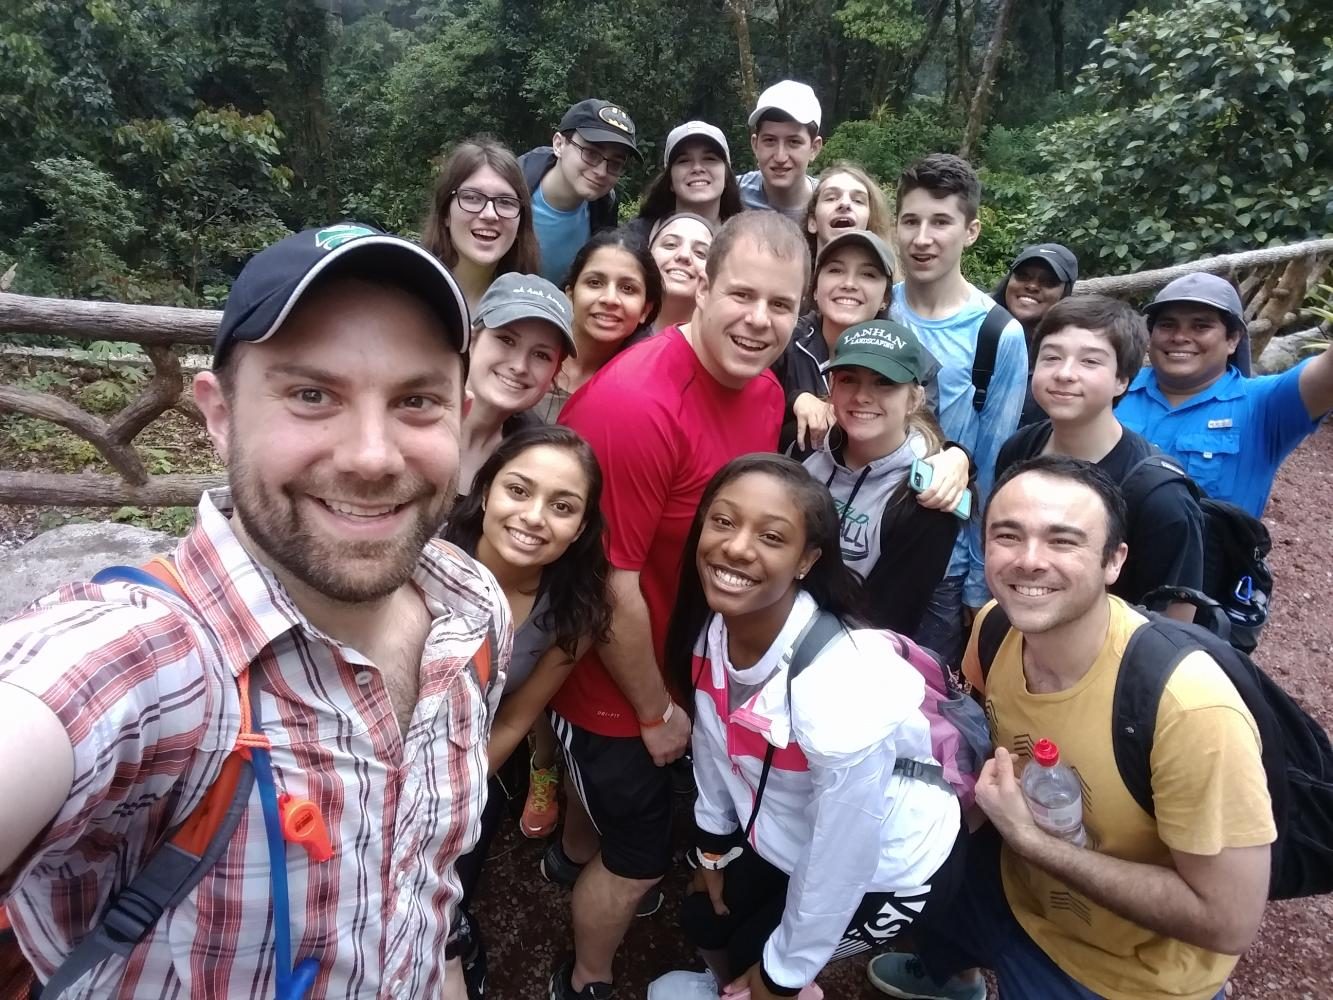 The+spring+break+trip+to+Costa+Rica+was+chaperoned+by+Mr.+Phil+Deaton+and+Mr.+Corey+Rice.